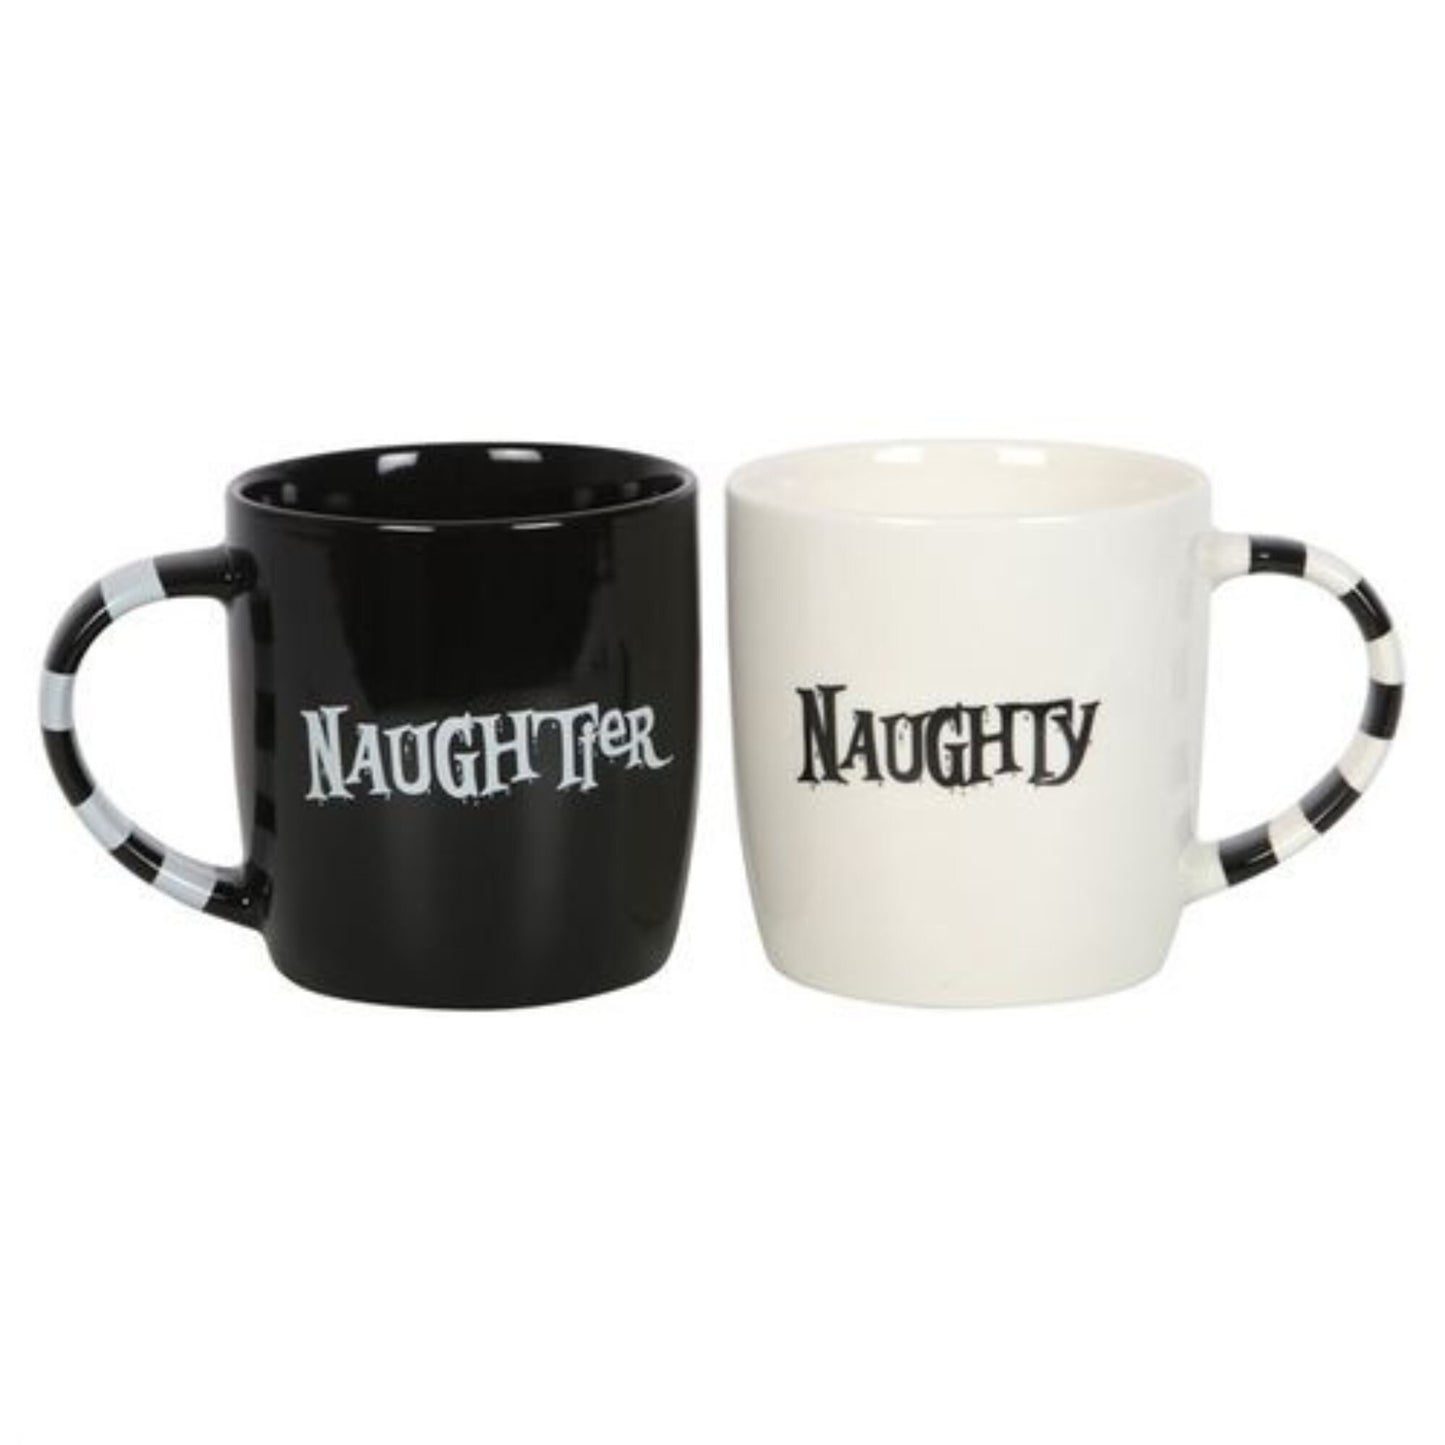 Naughty And Naughtier Ceramic Mugs, Set Of Two Coffee Mugs, Black And White Design, Gift For Couple, Fun Best Friends Present